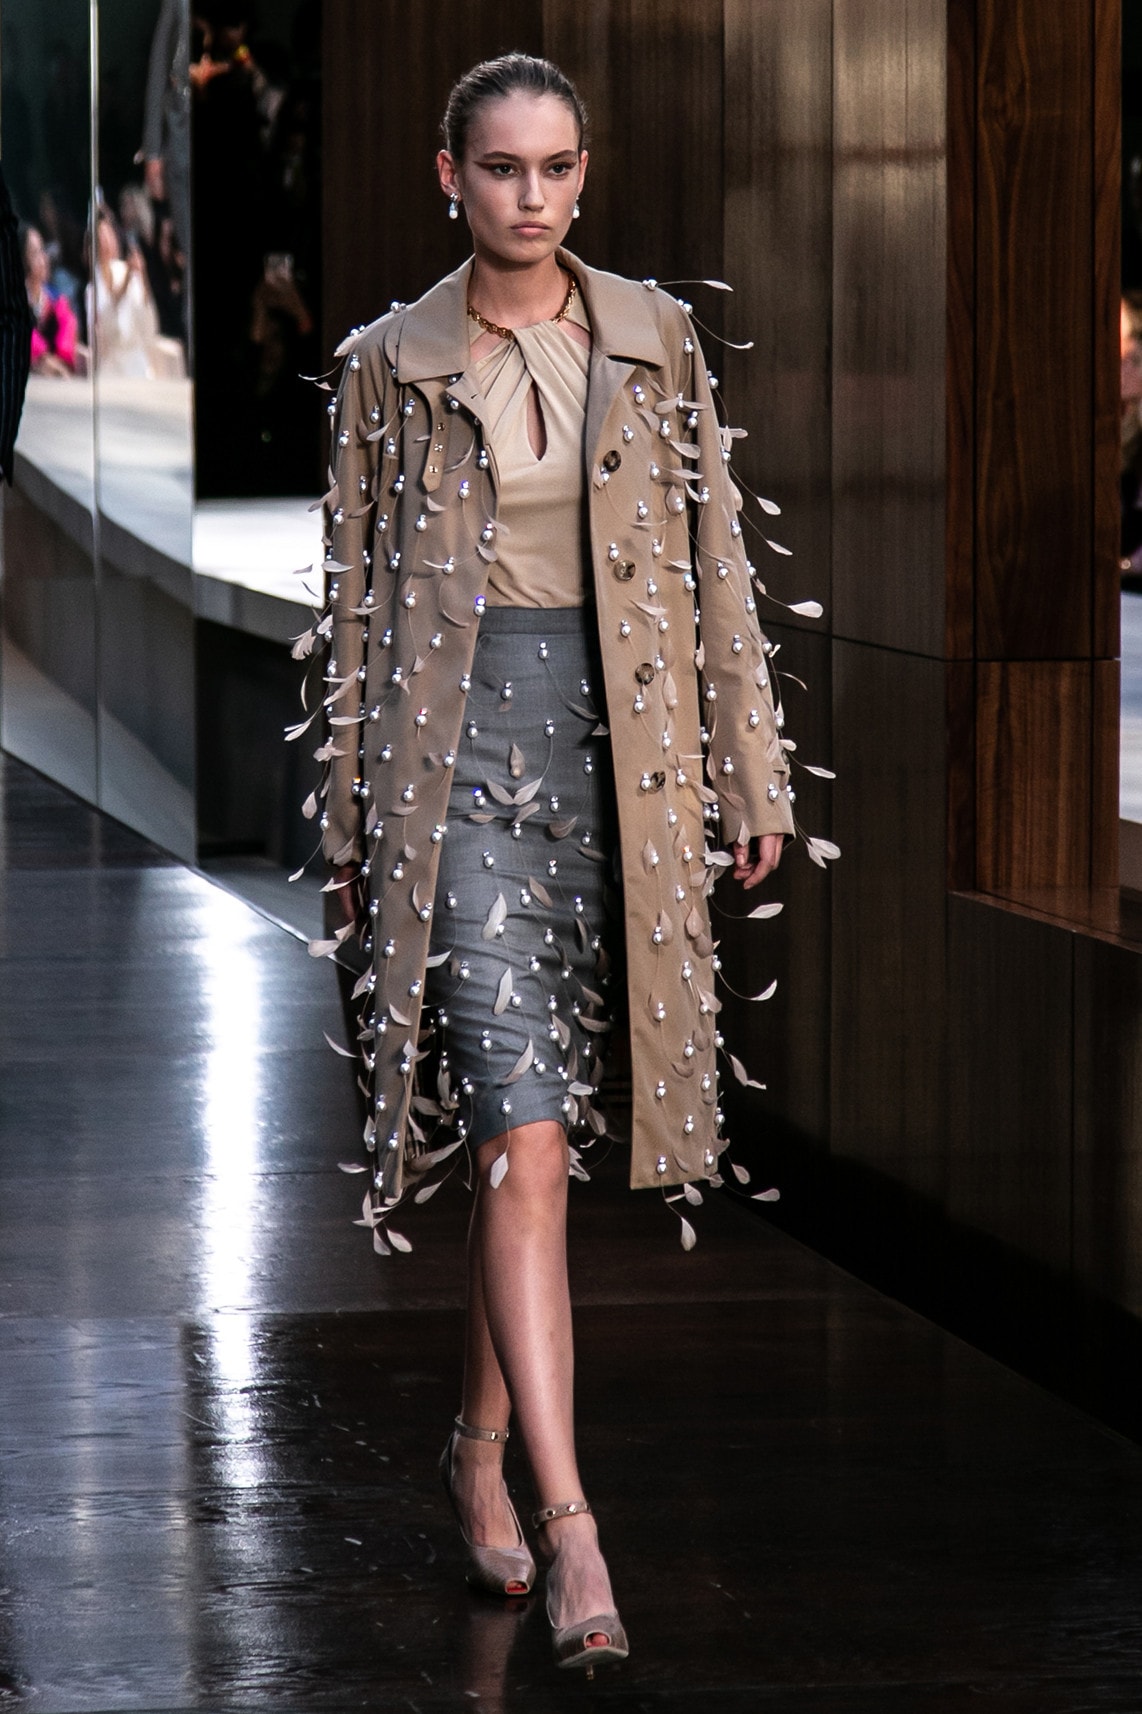 Riccardo Tisci Burberry Debut Runway Show SS19 coat pearls feathers